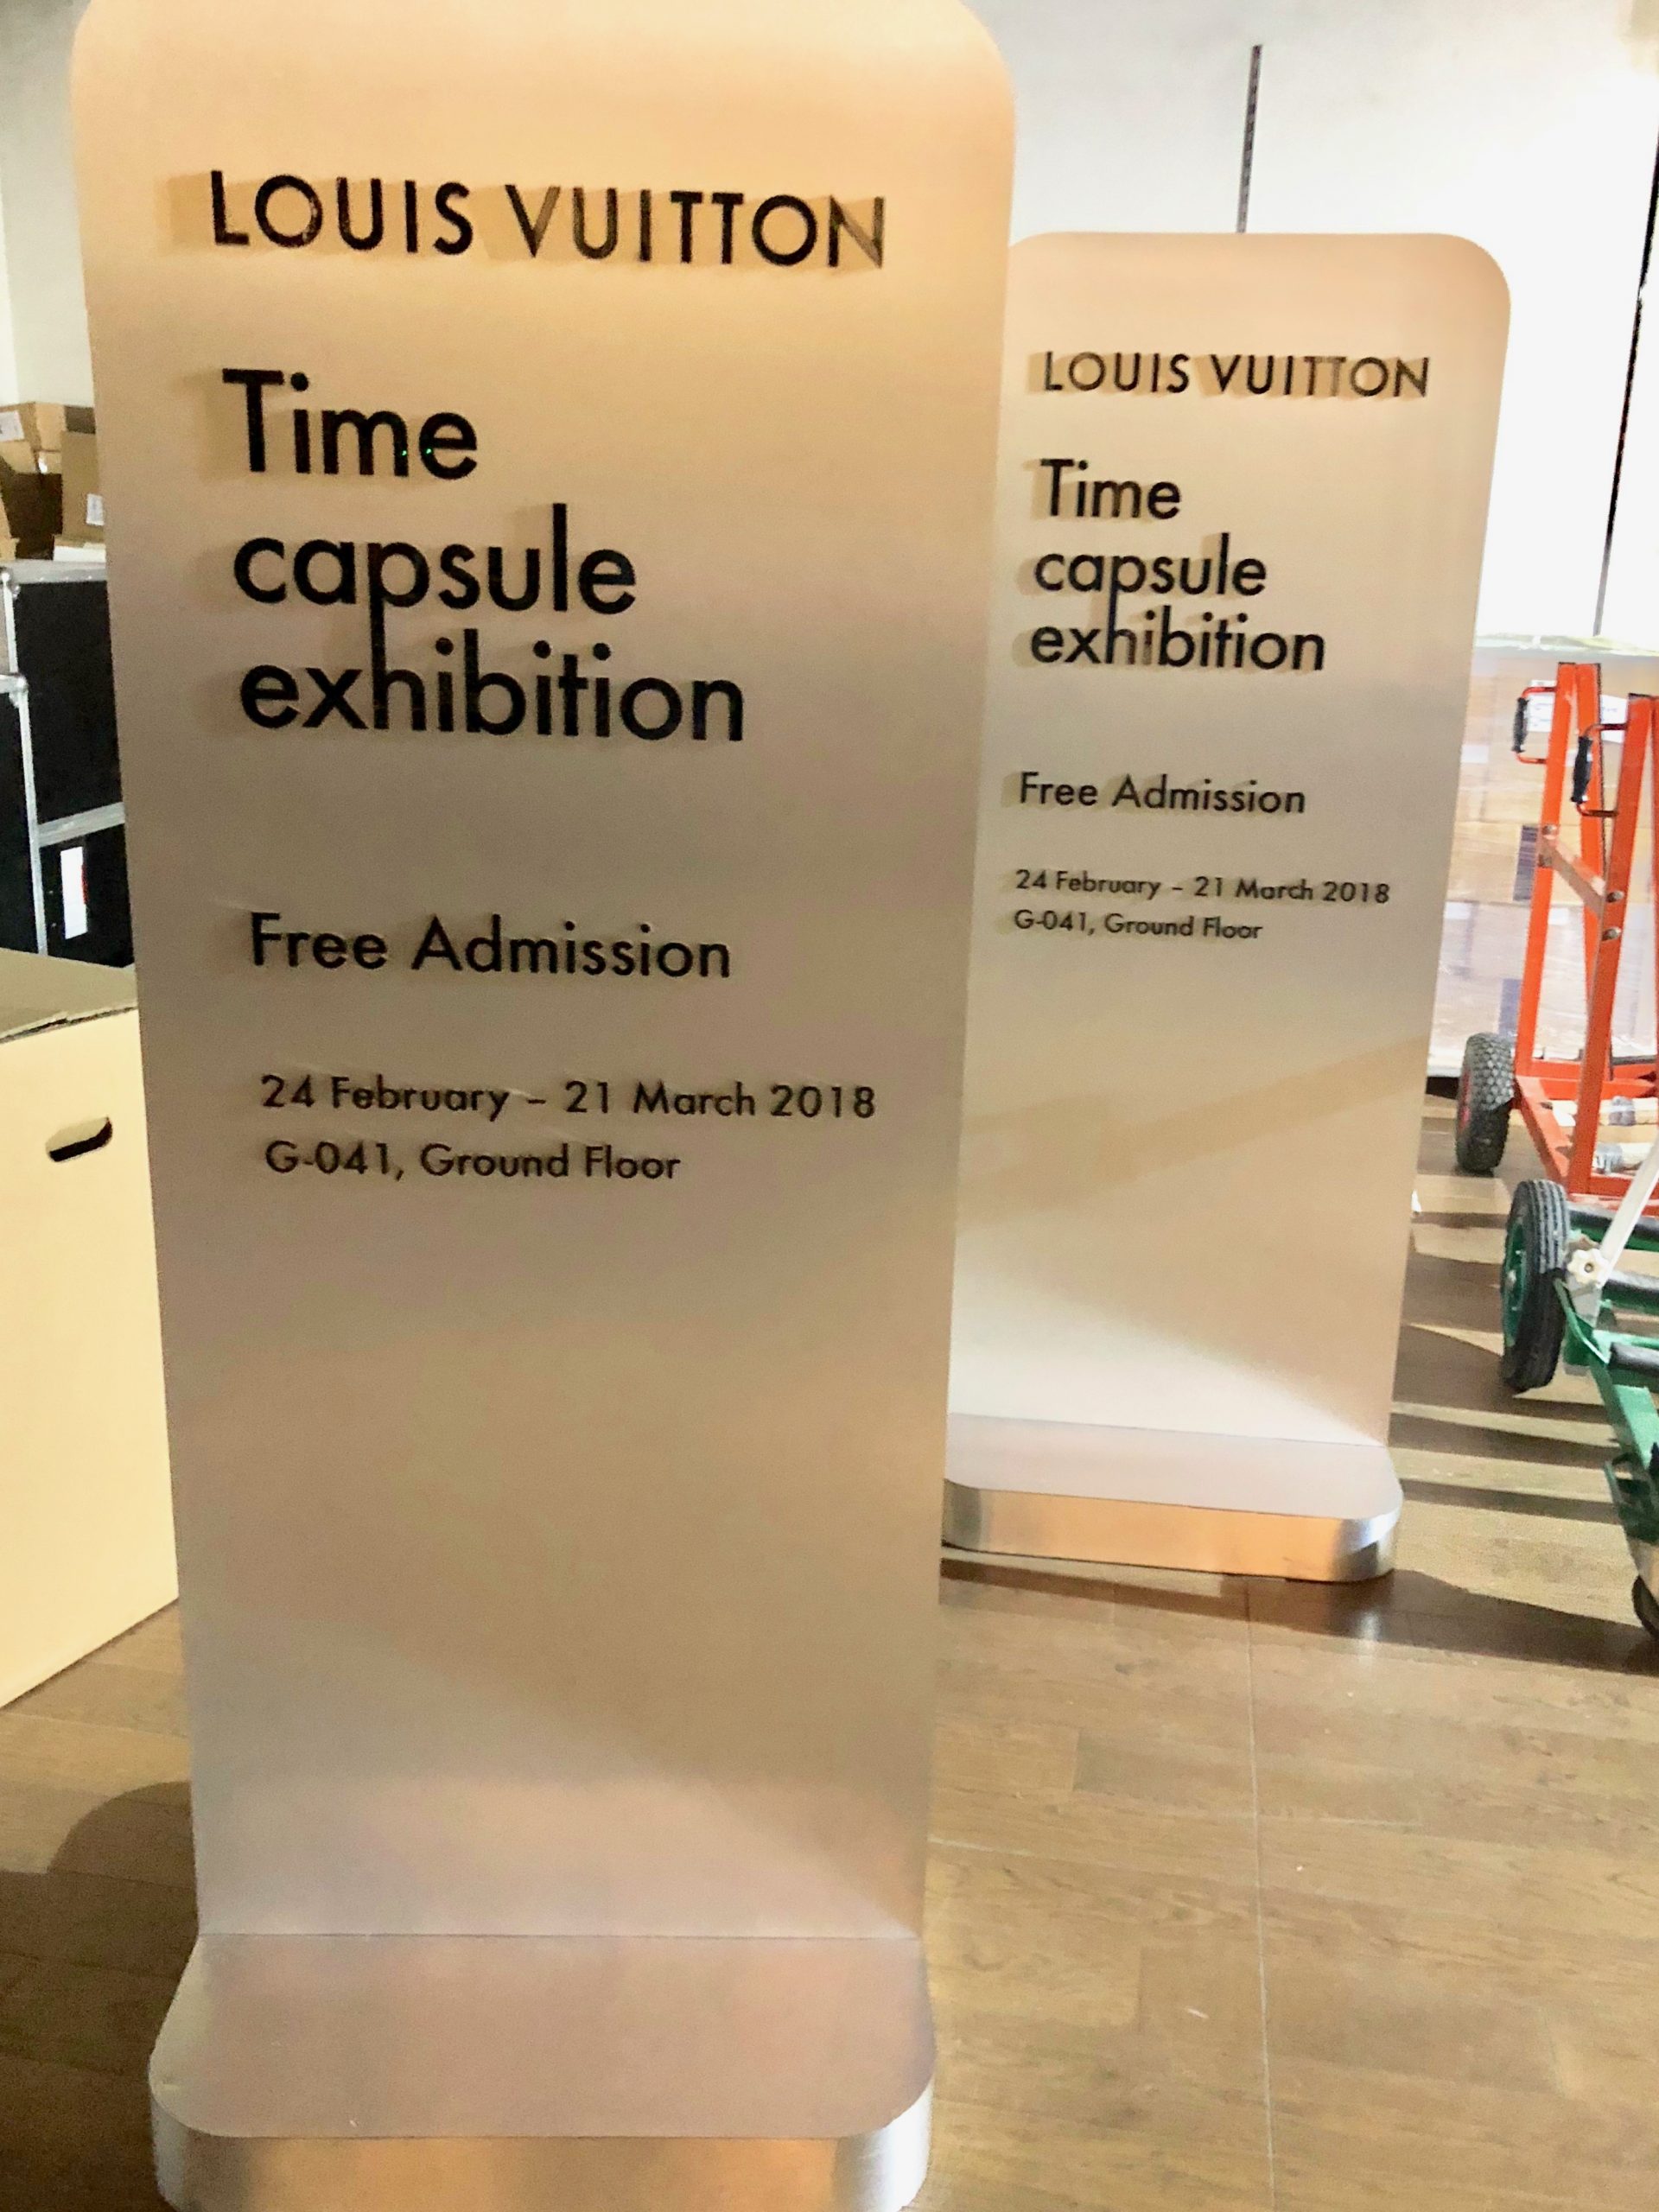 TIME CAPSULE EXHIBITION IN LOS ANGELES